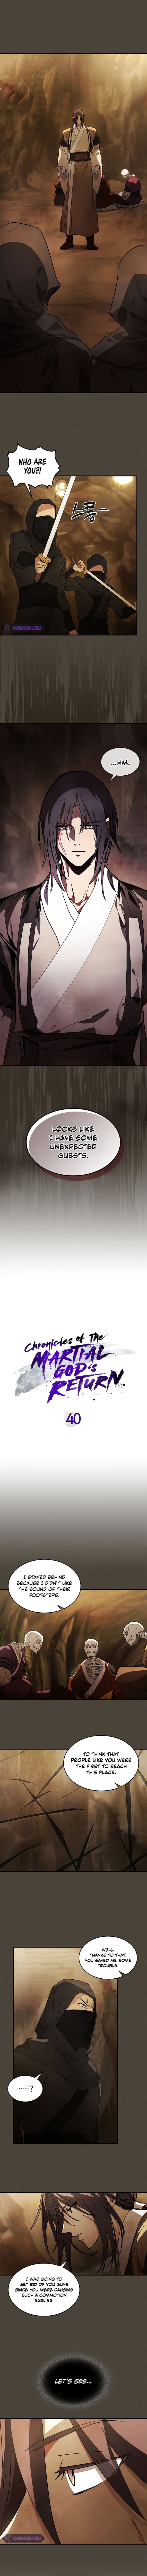 chronicles-of-the-martial-gods-return-chap-40-1